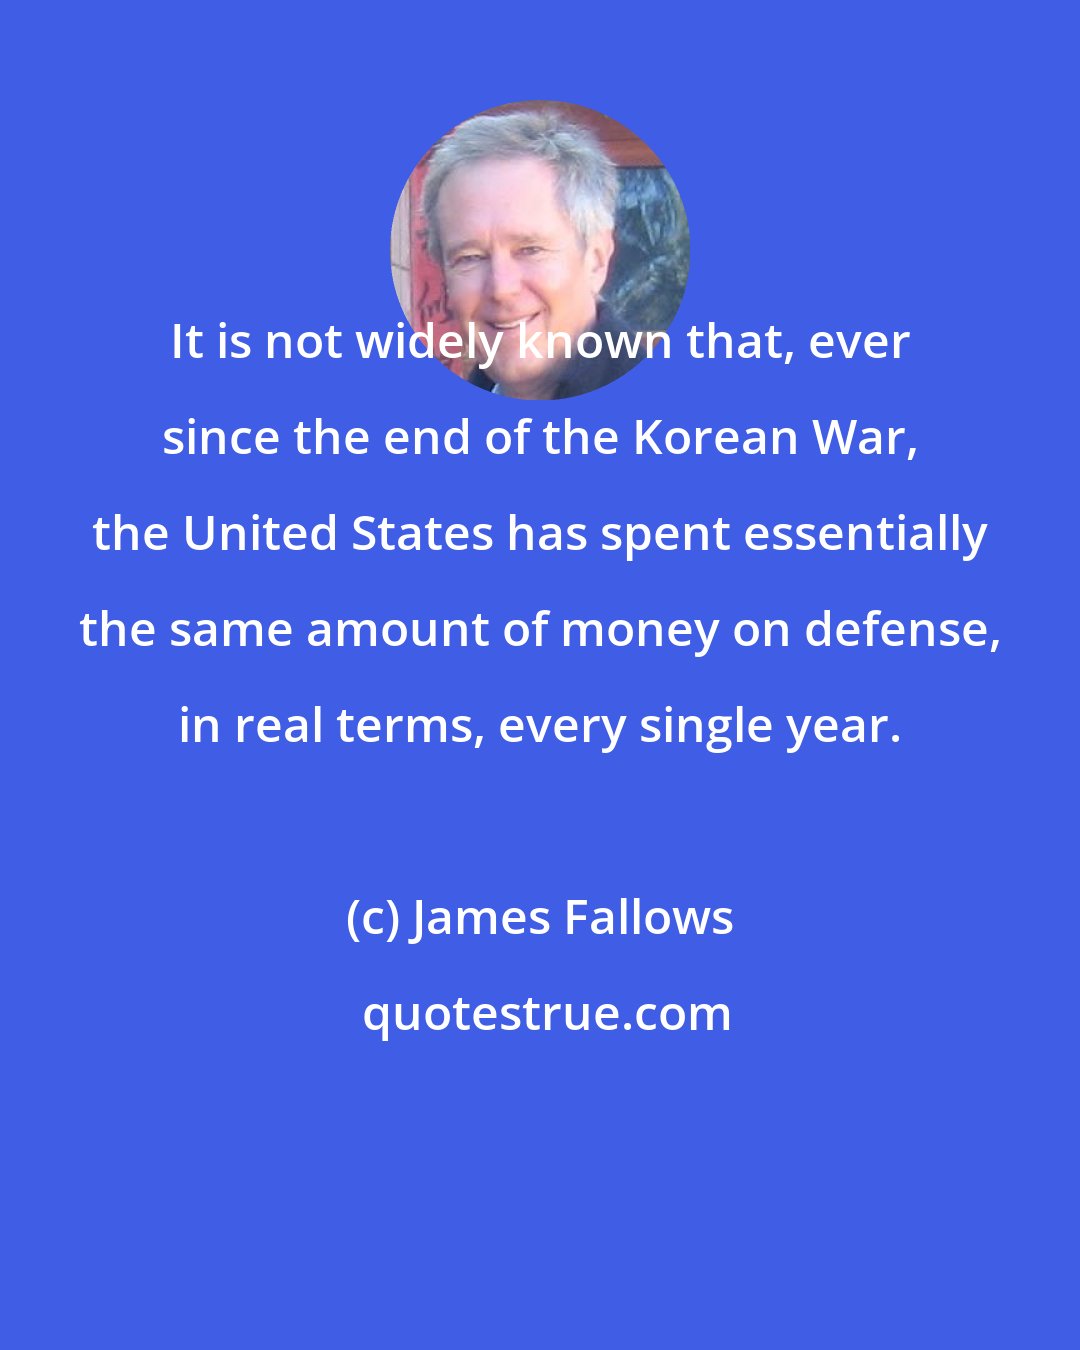 James Fallows: It is not widely known that, ever since the end of the Korean War, the United States has spent essentially the same amount of money on defense, in real terms, every single year.